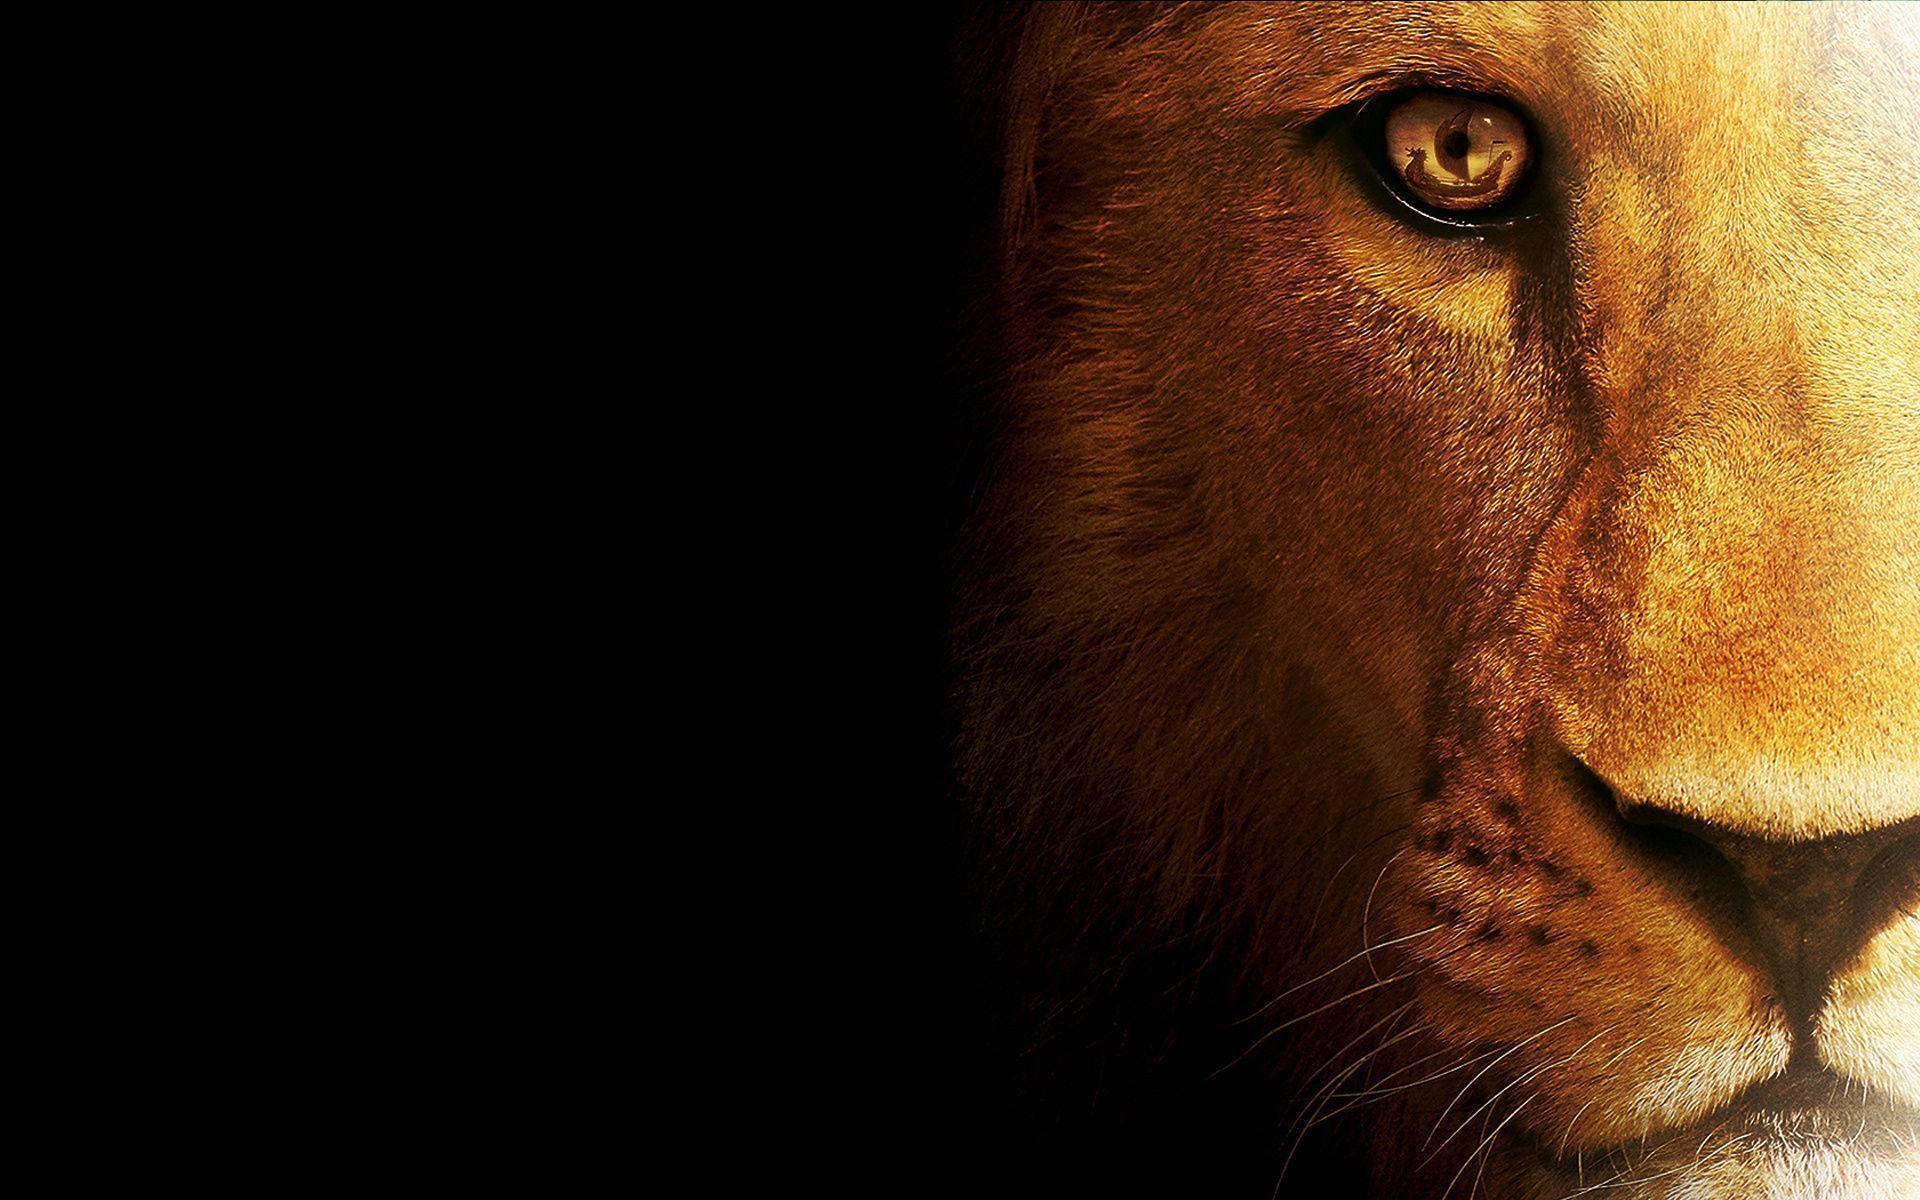 Wallpaper For > Angry Lion Face Wallpaper